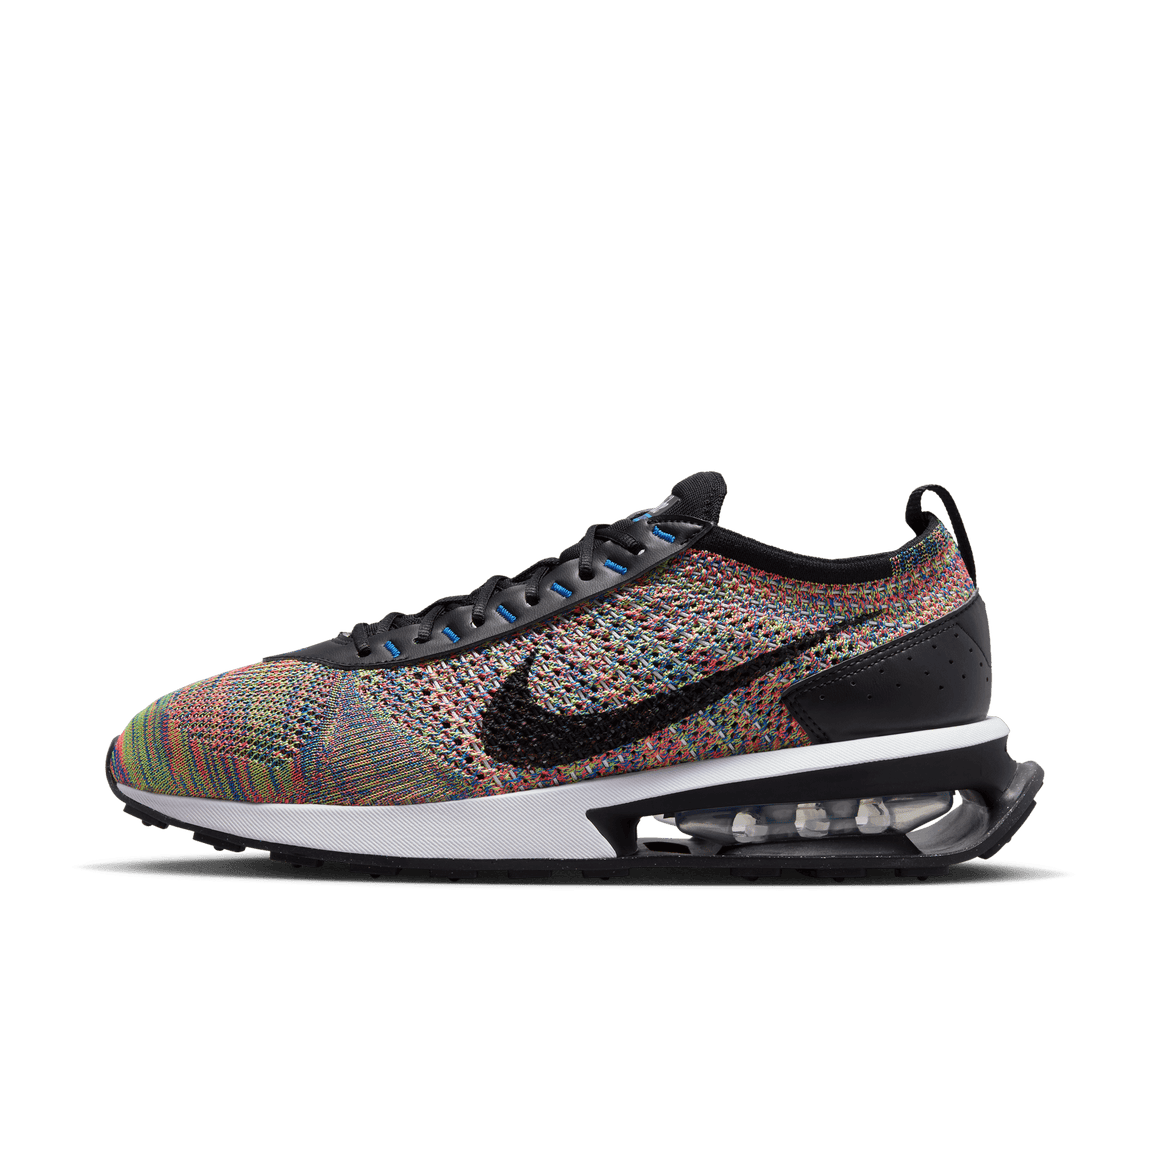 Nike Air Max Flyknit Racer (Multicolor/Black/Racer Blue-White) - Nike Air Max Flyknit Racer (Multicolor/Black/Racer Blue-White) - 